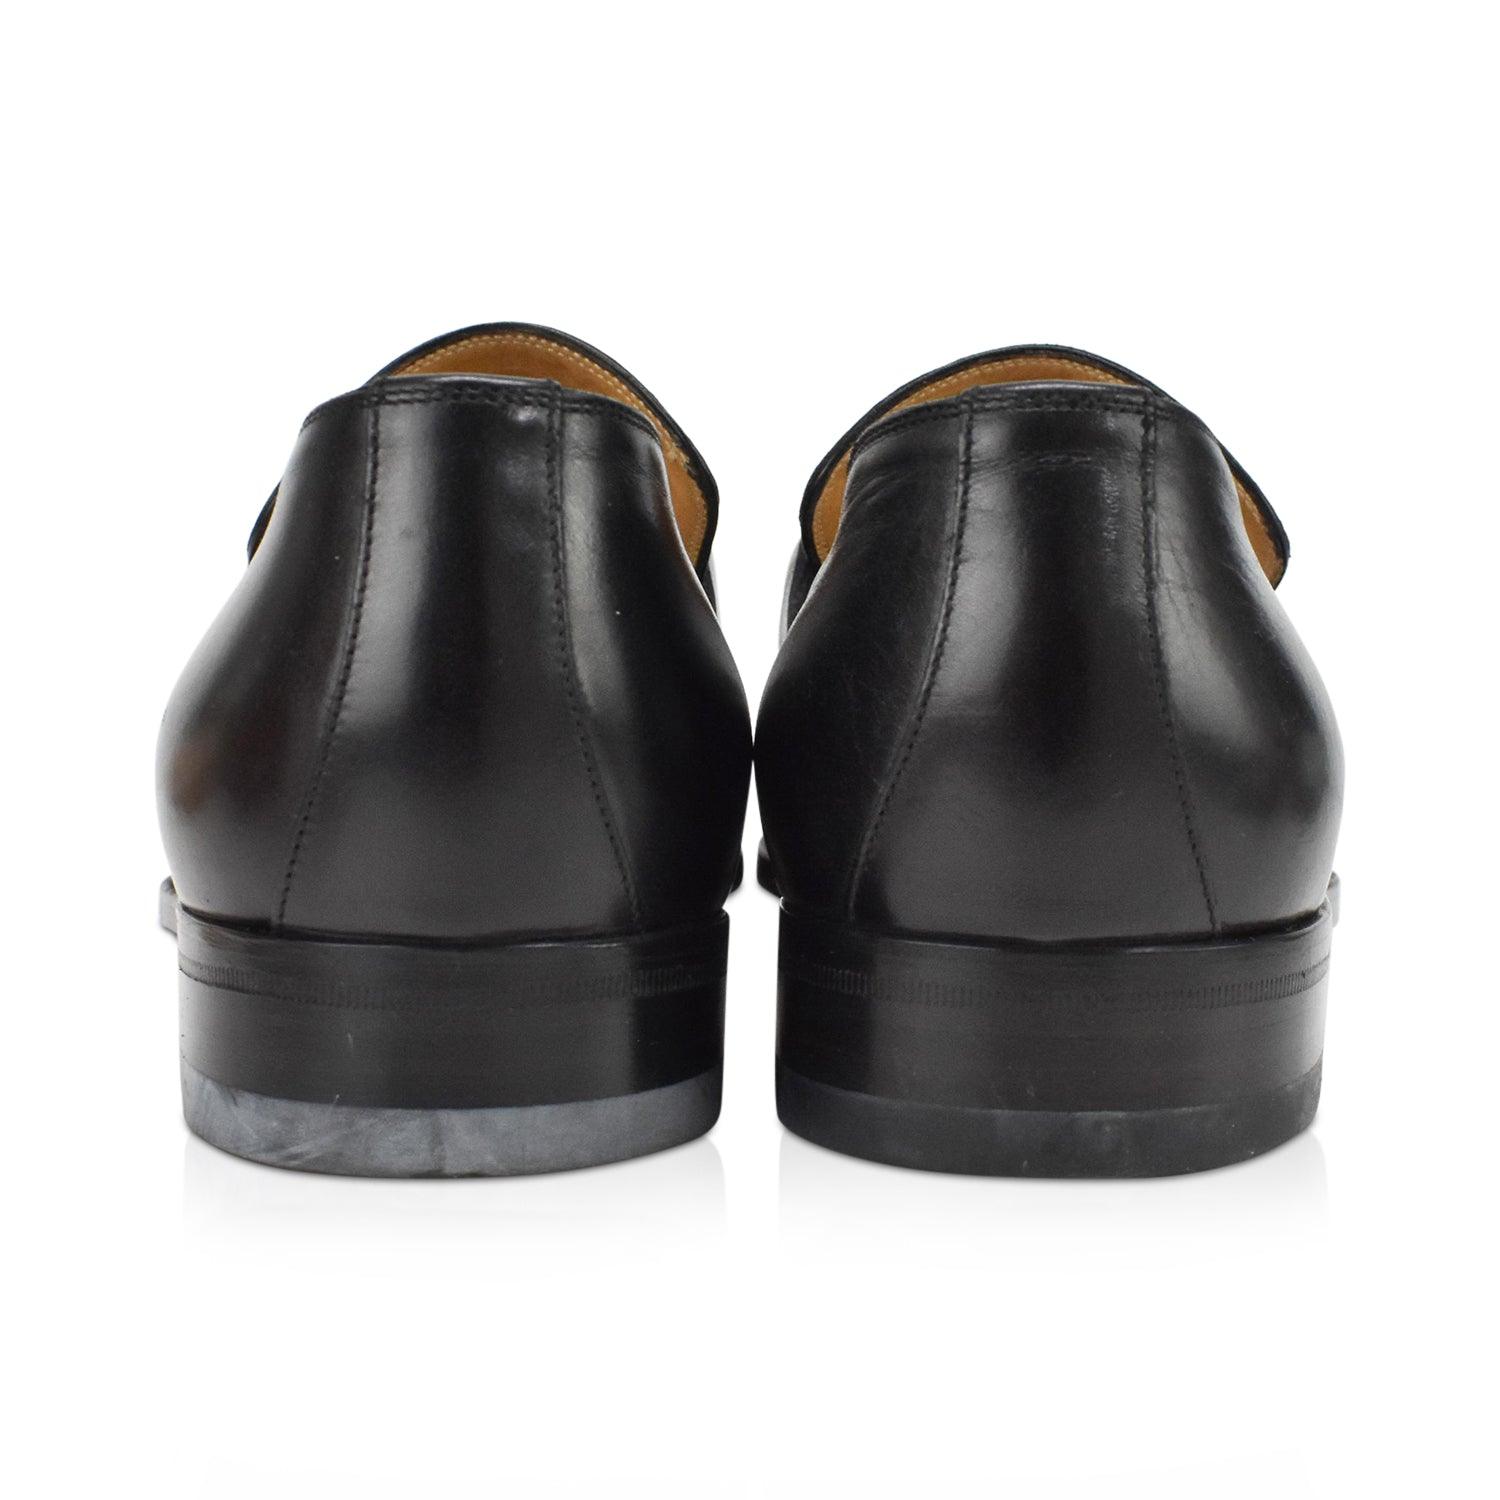 Gucci Dress Shoes - Men's 8.5 - Fashionably Yours